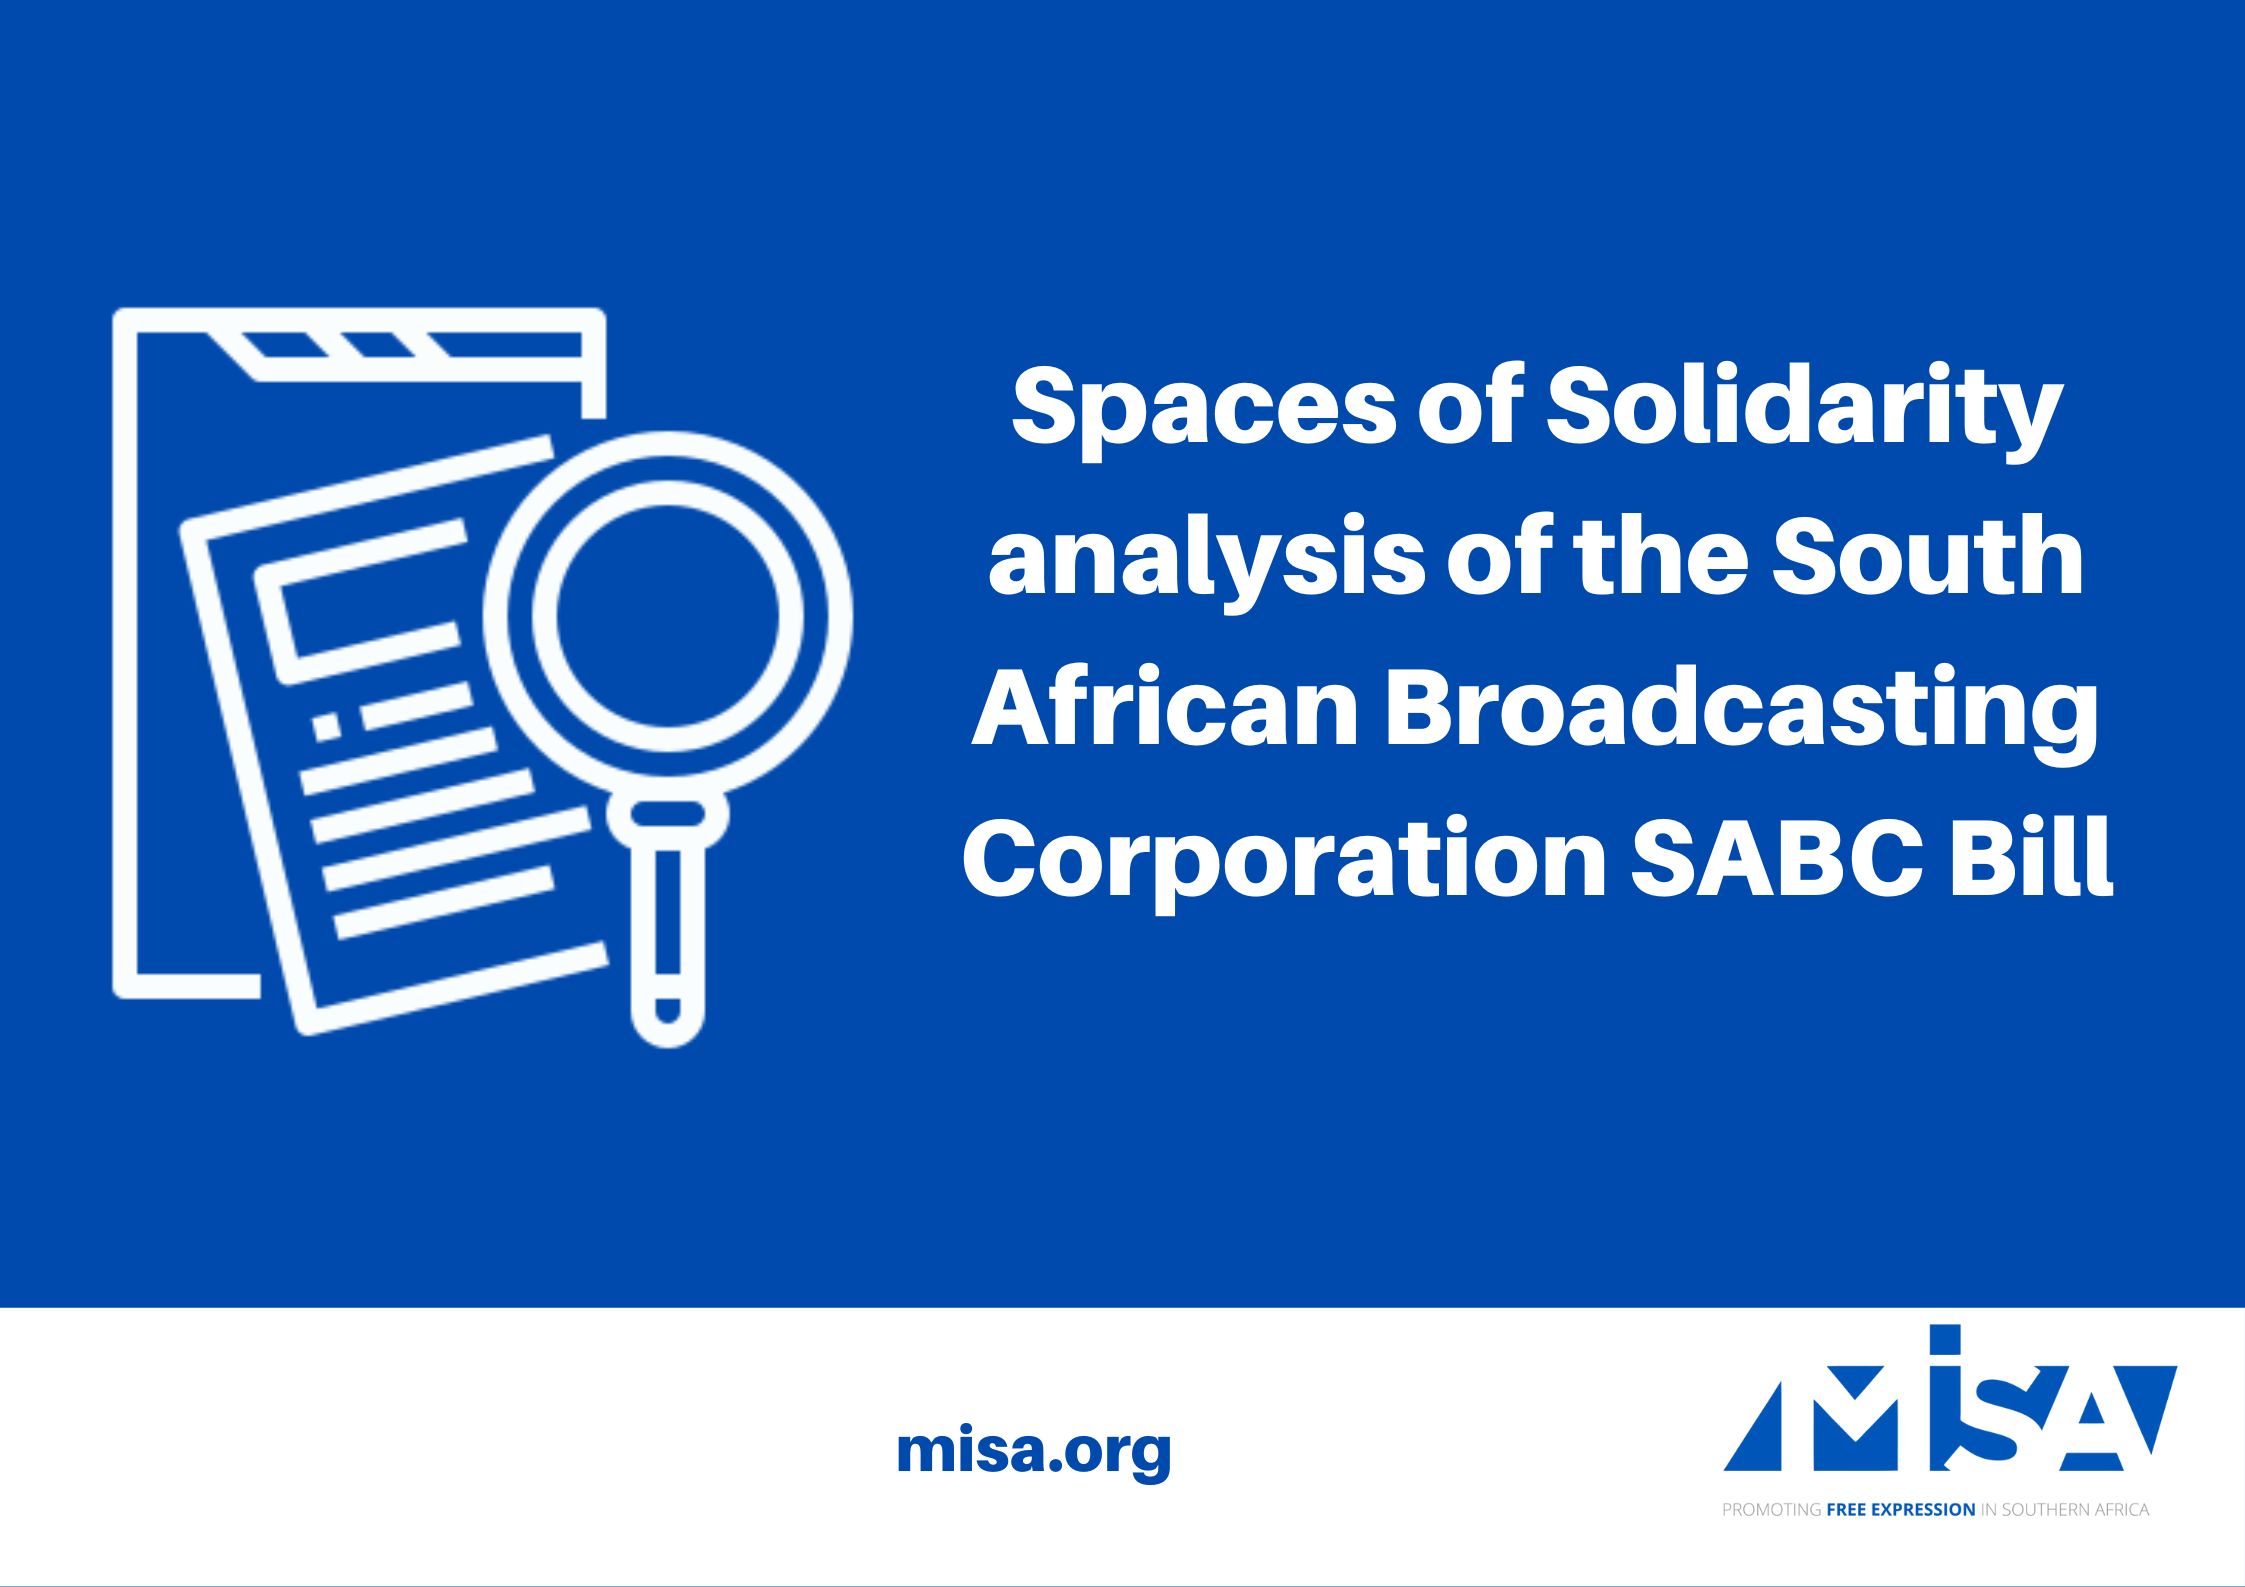 Spaces of Solidarity analysis of the South African Broadcasting Corporation SABC Bill